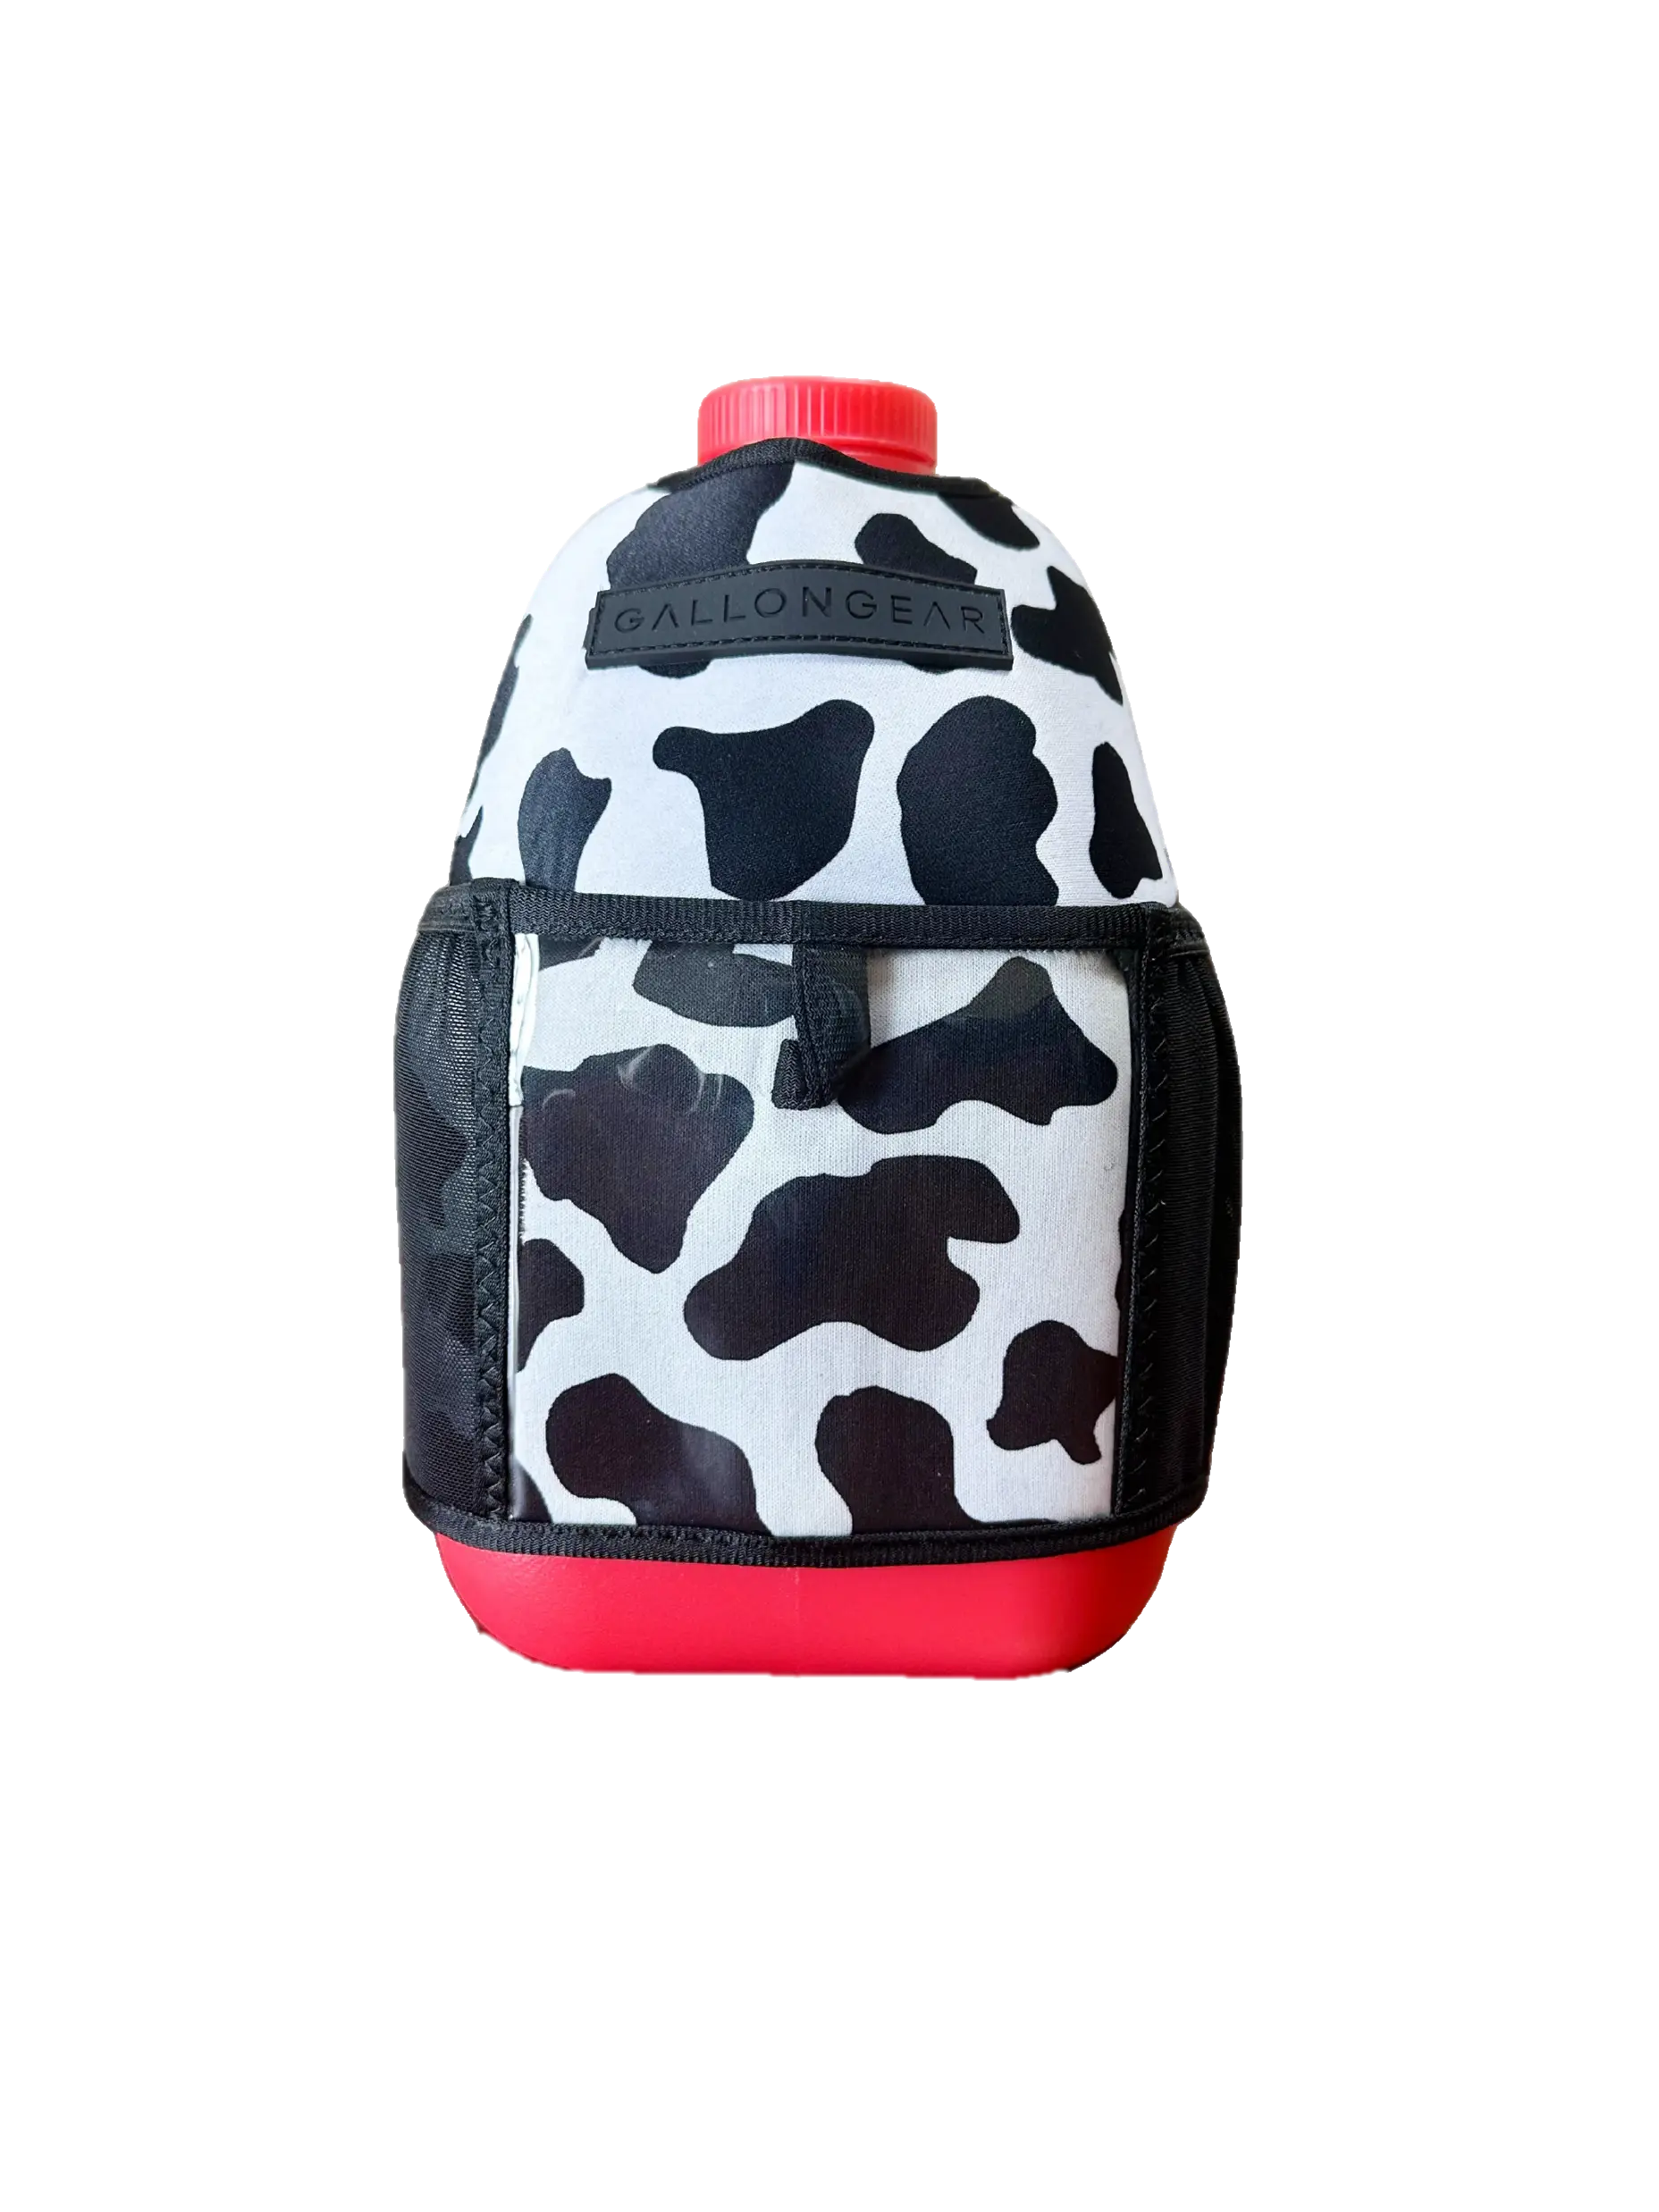 (1 GALLON COMBO) Red Jug / Black/White Cow Booty